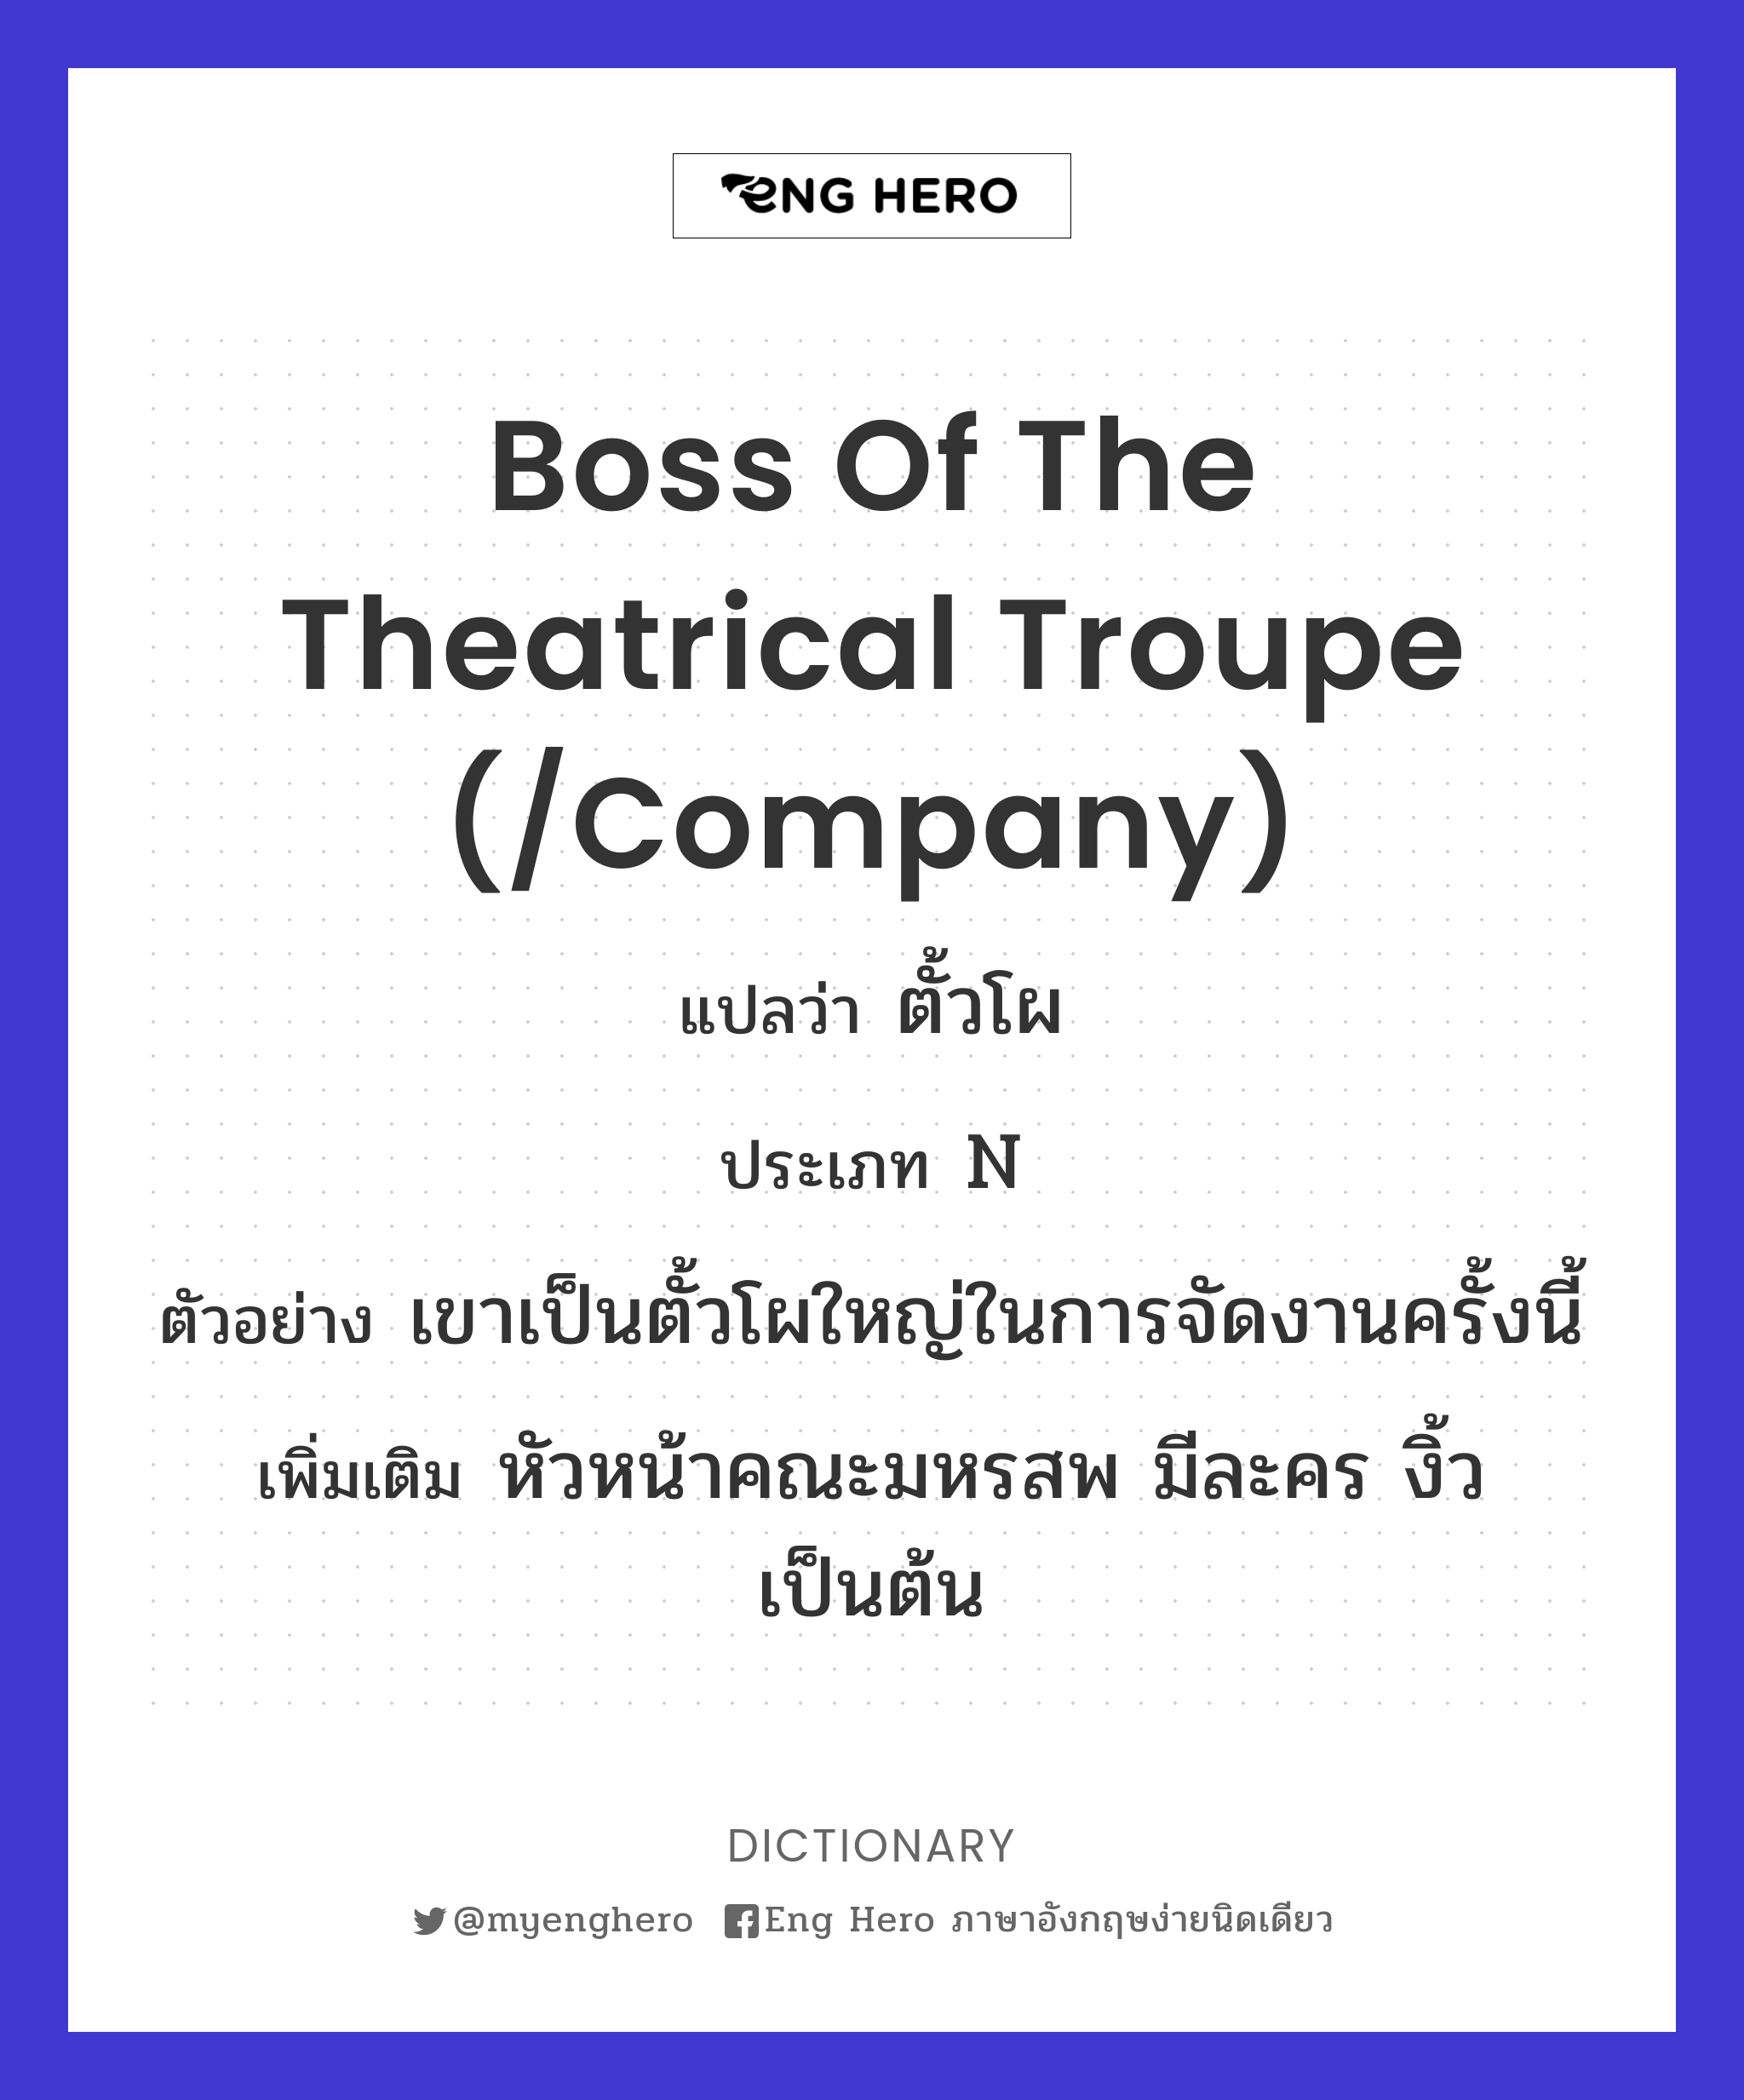 boss of the theatrical troupe (/company)